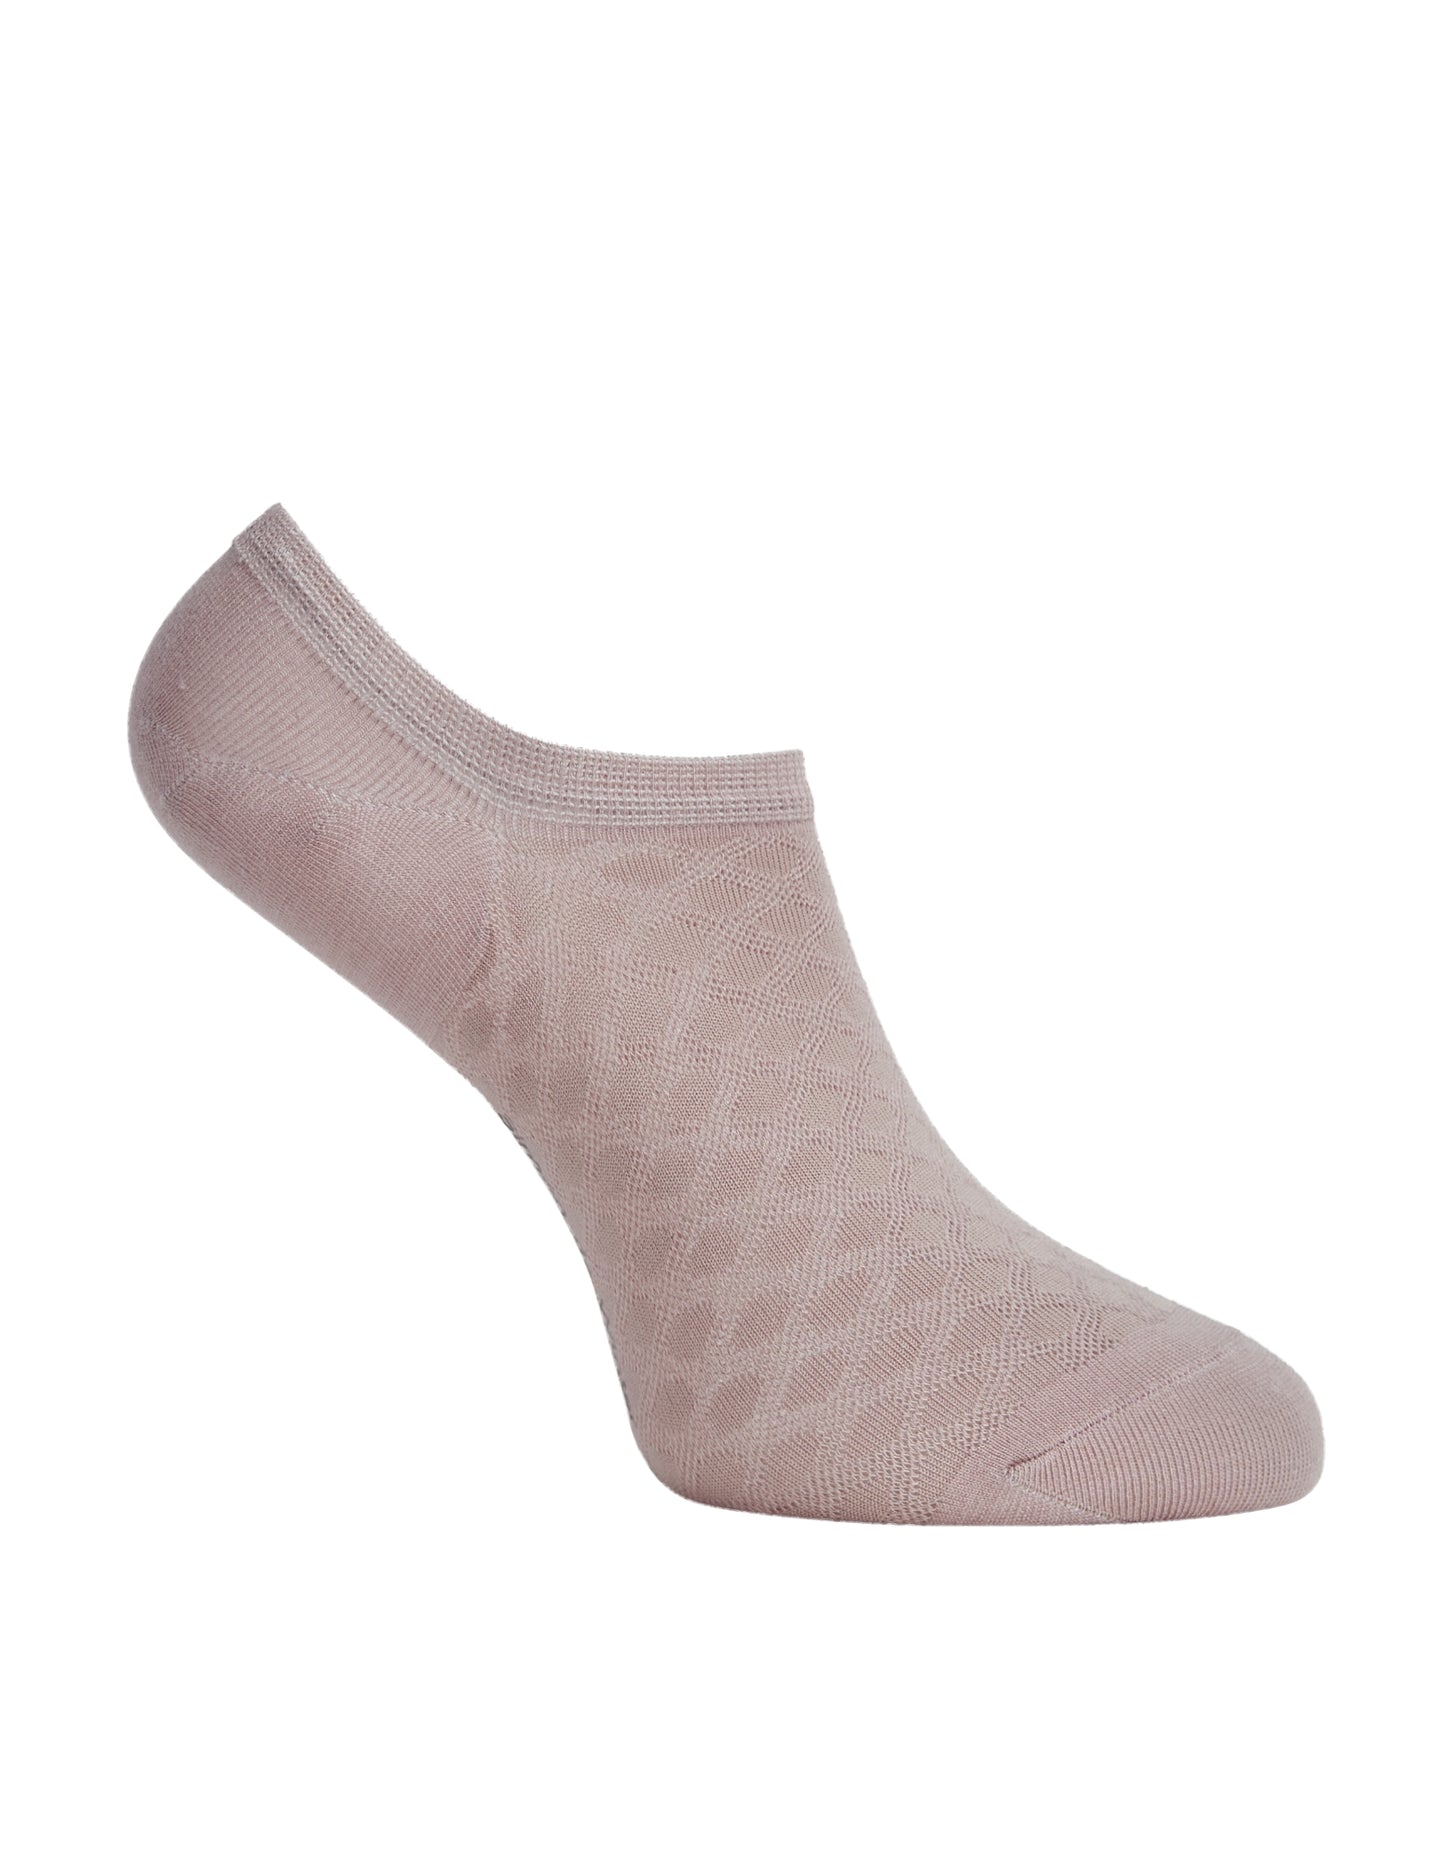 Side of Simon de Winter Women's Textured Viscose from Bamboo No Show Socks in Smokey rose